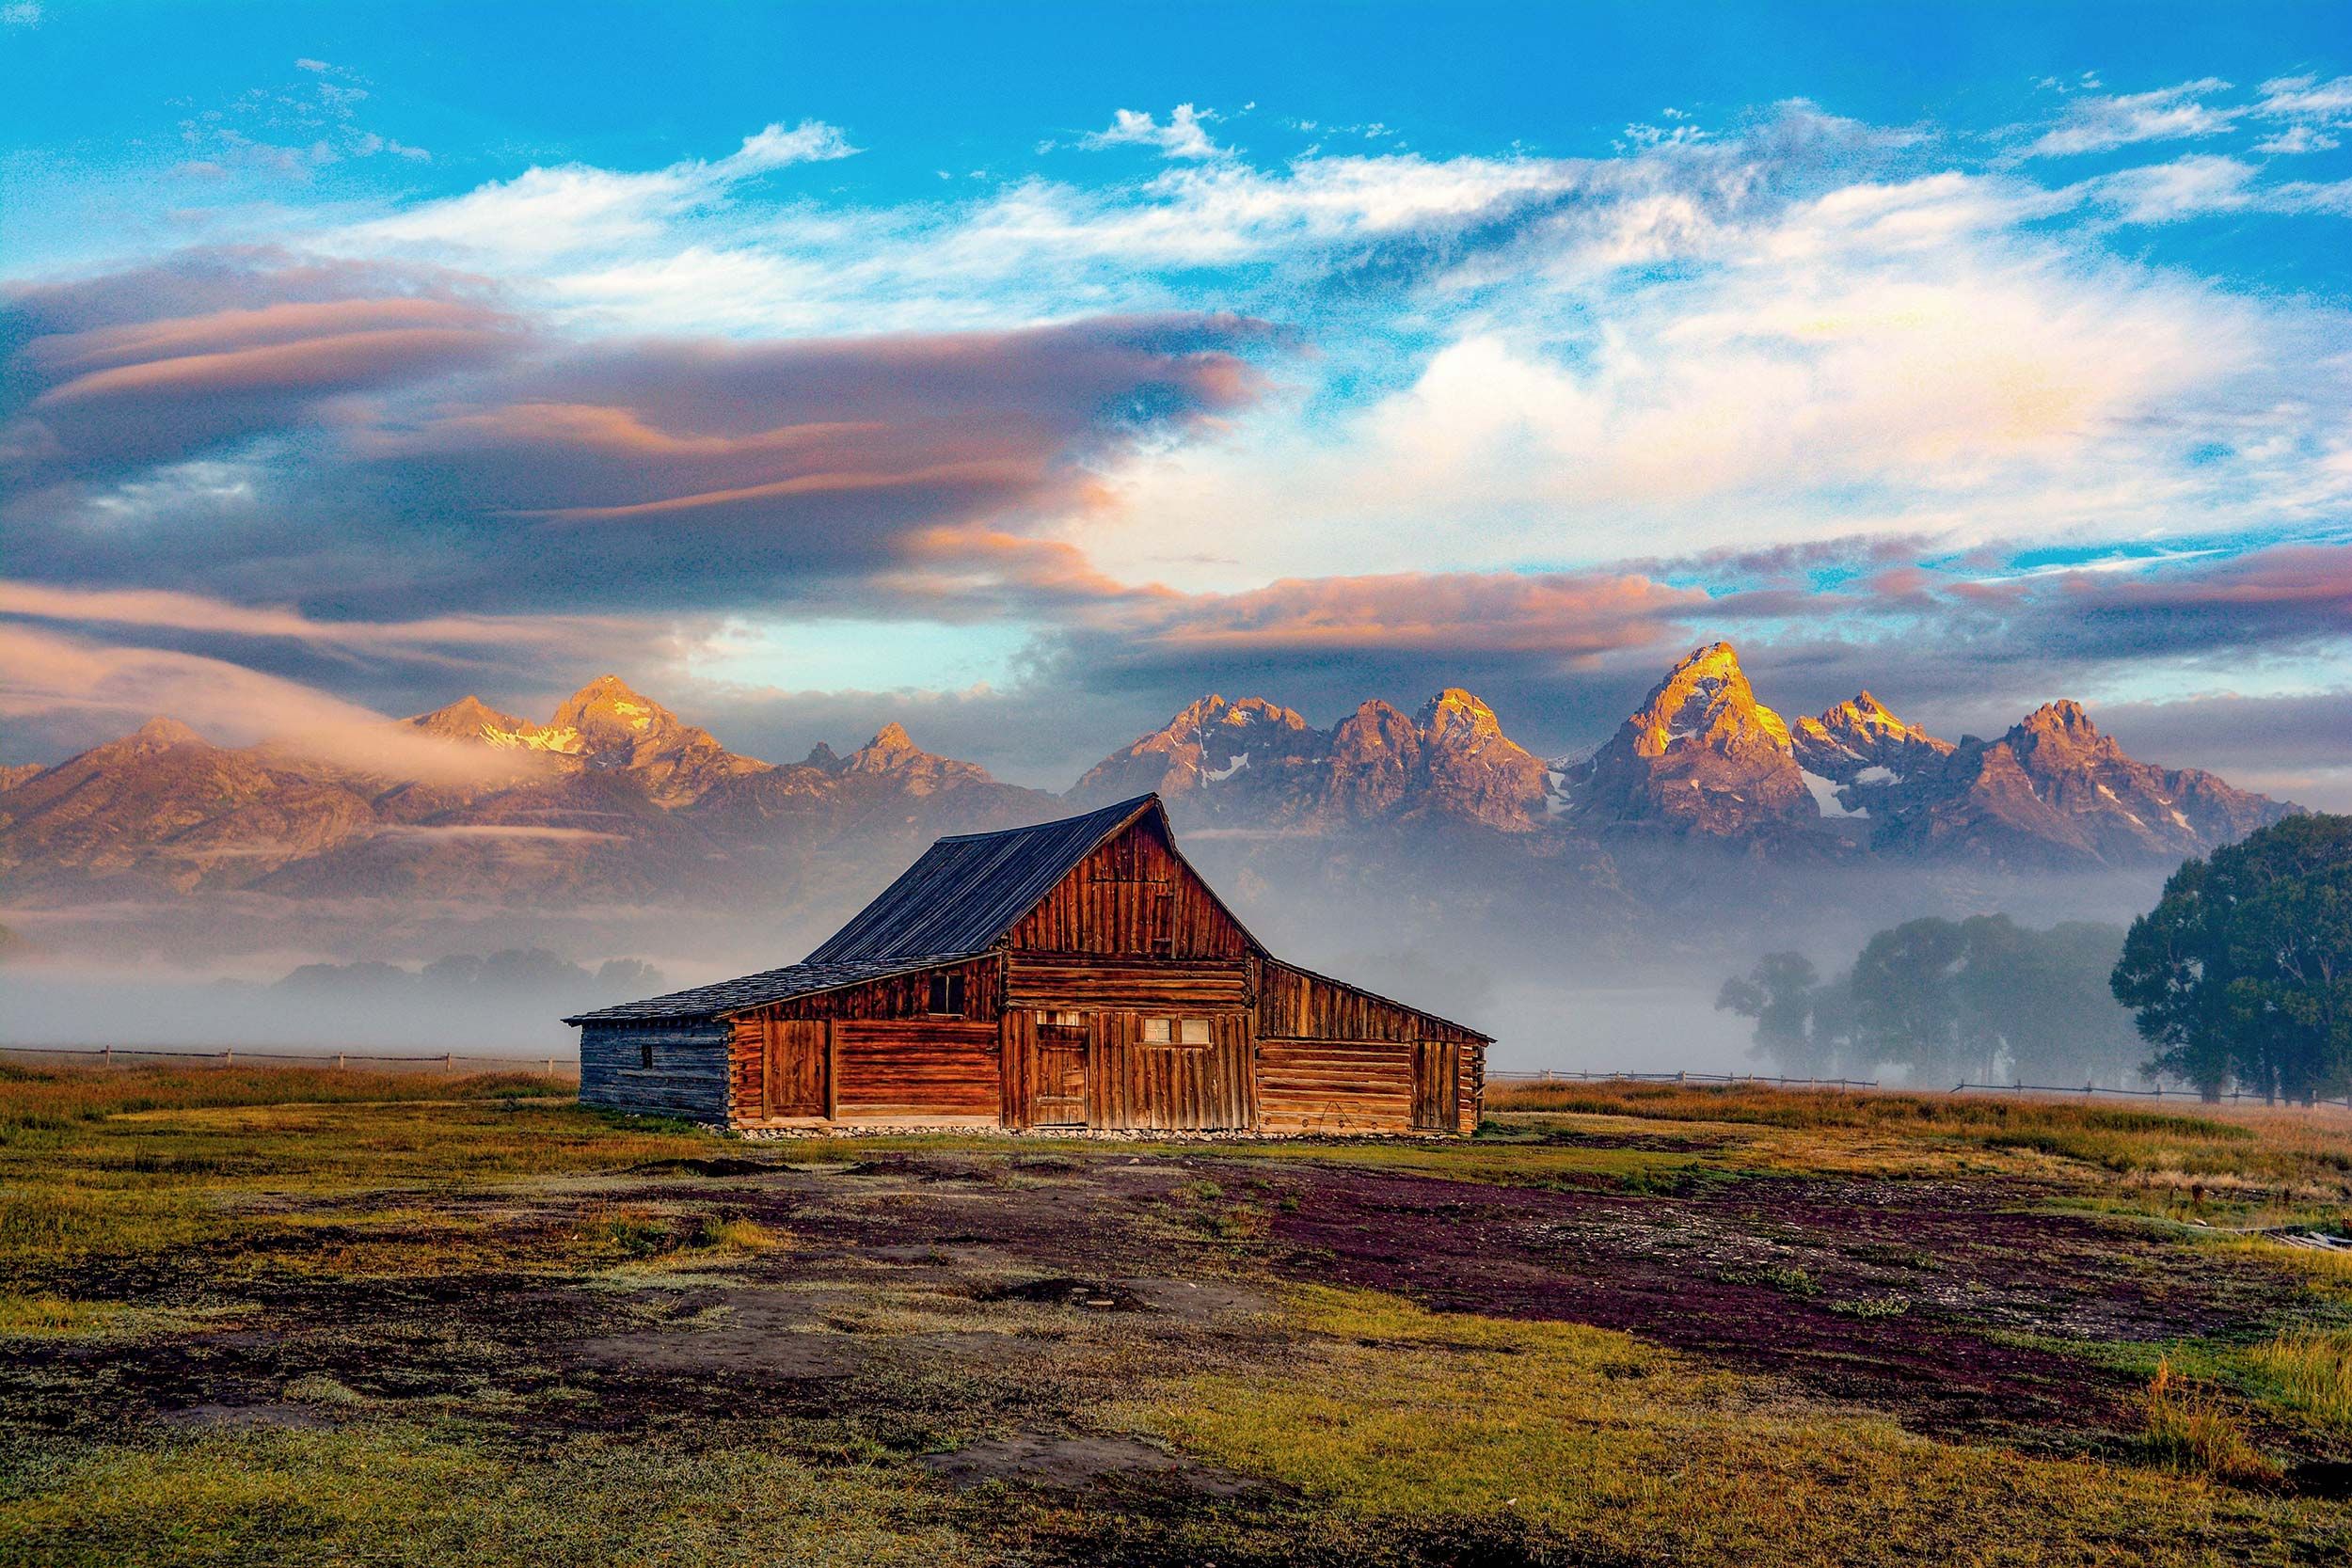 A stunning photograph capturing a house against the backdrop of a scenic mountain edge.